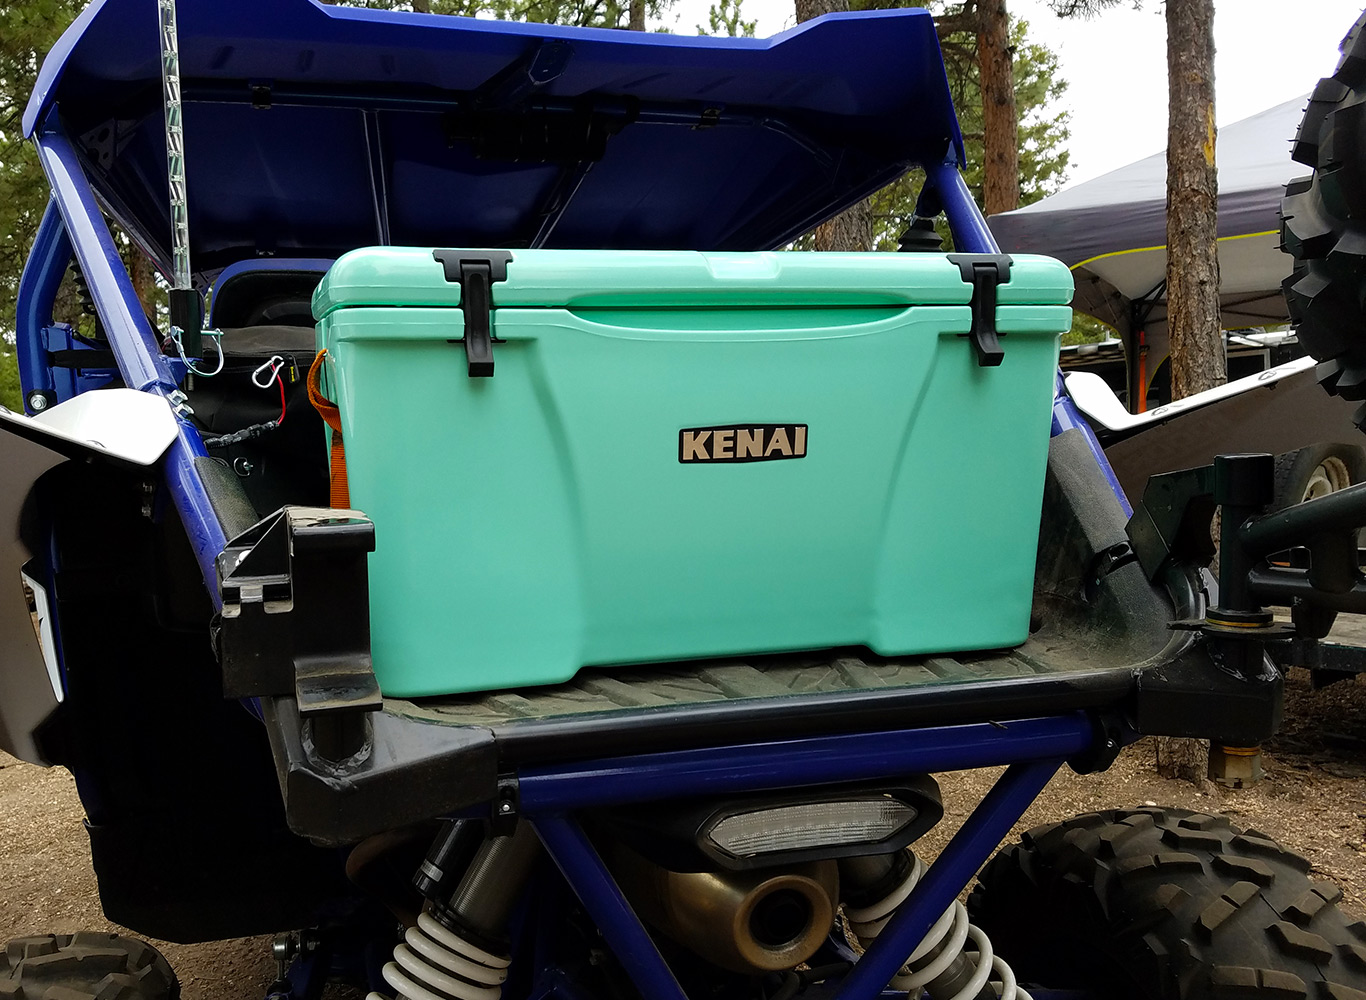 KENAI 45 by Grizzly Coolers